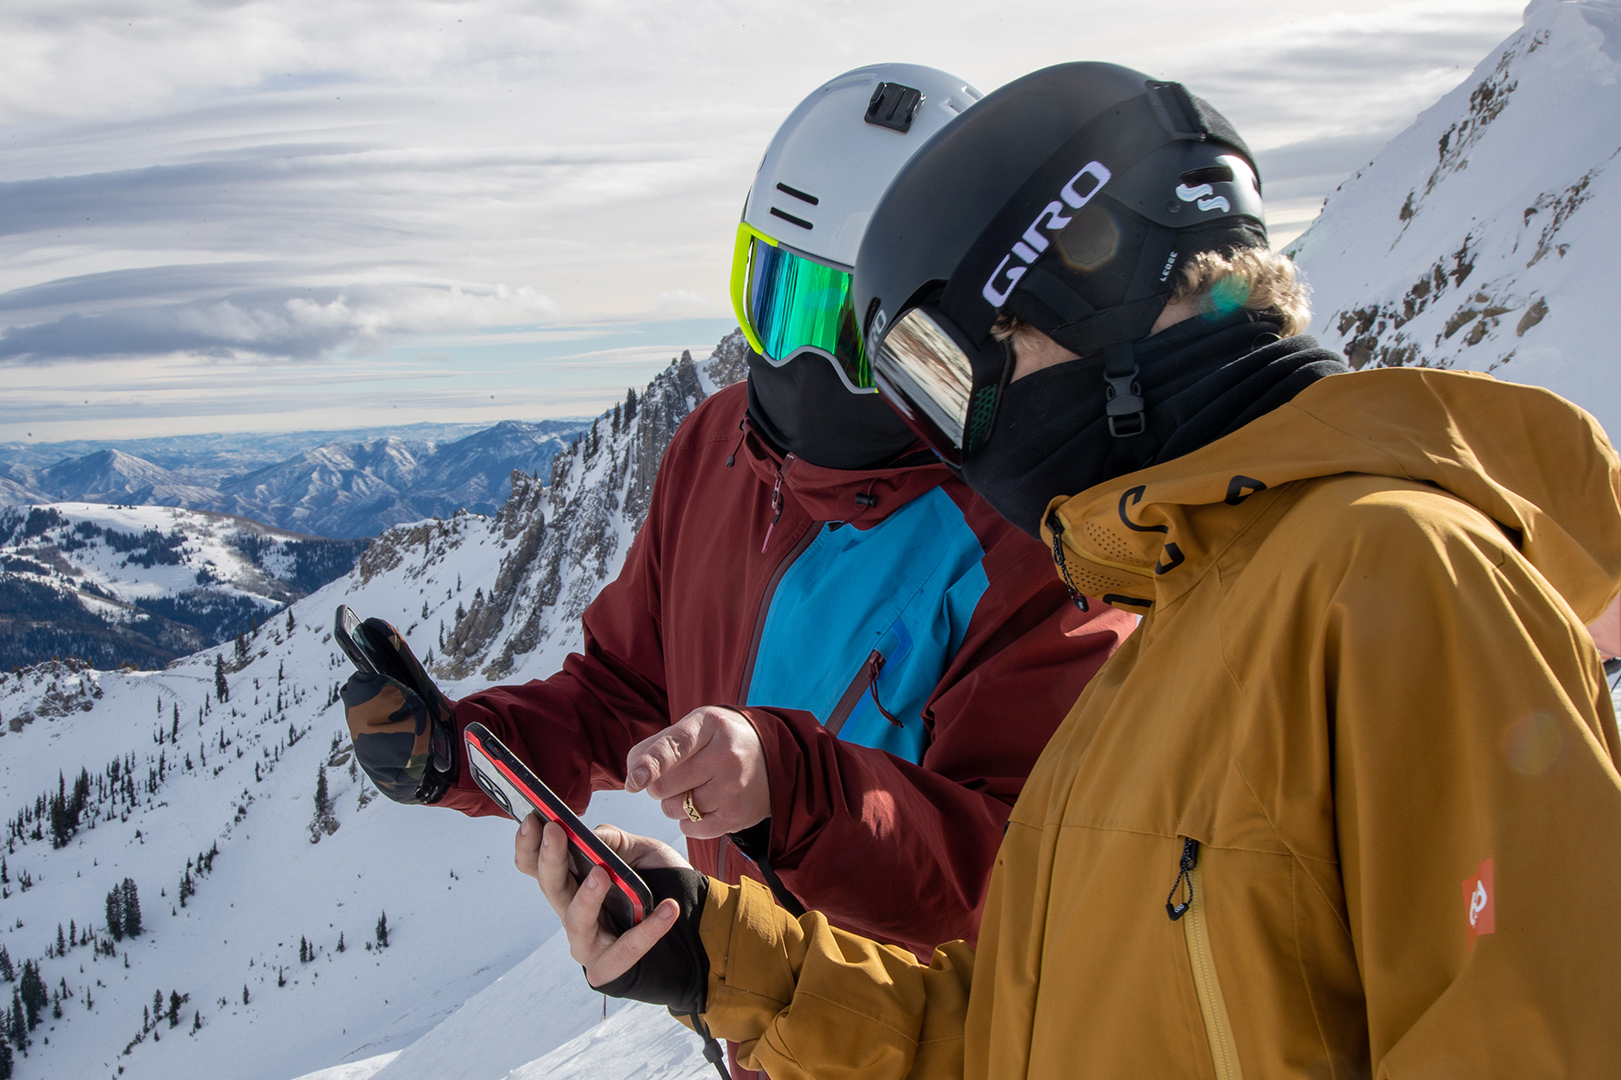 skiers using phones to route find